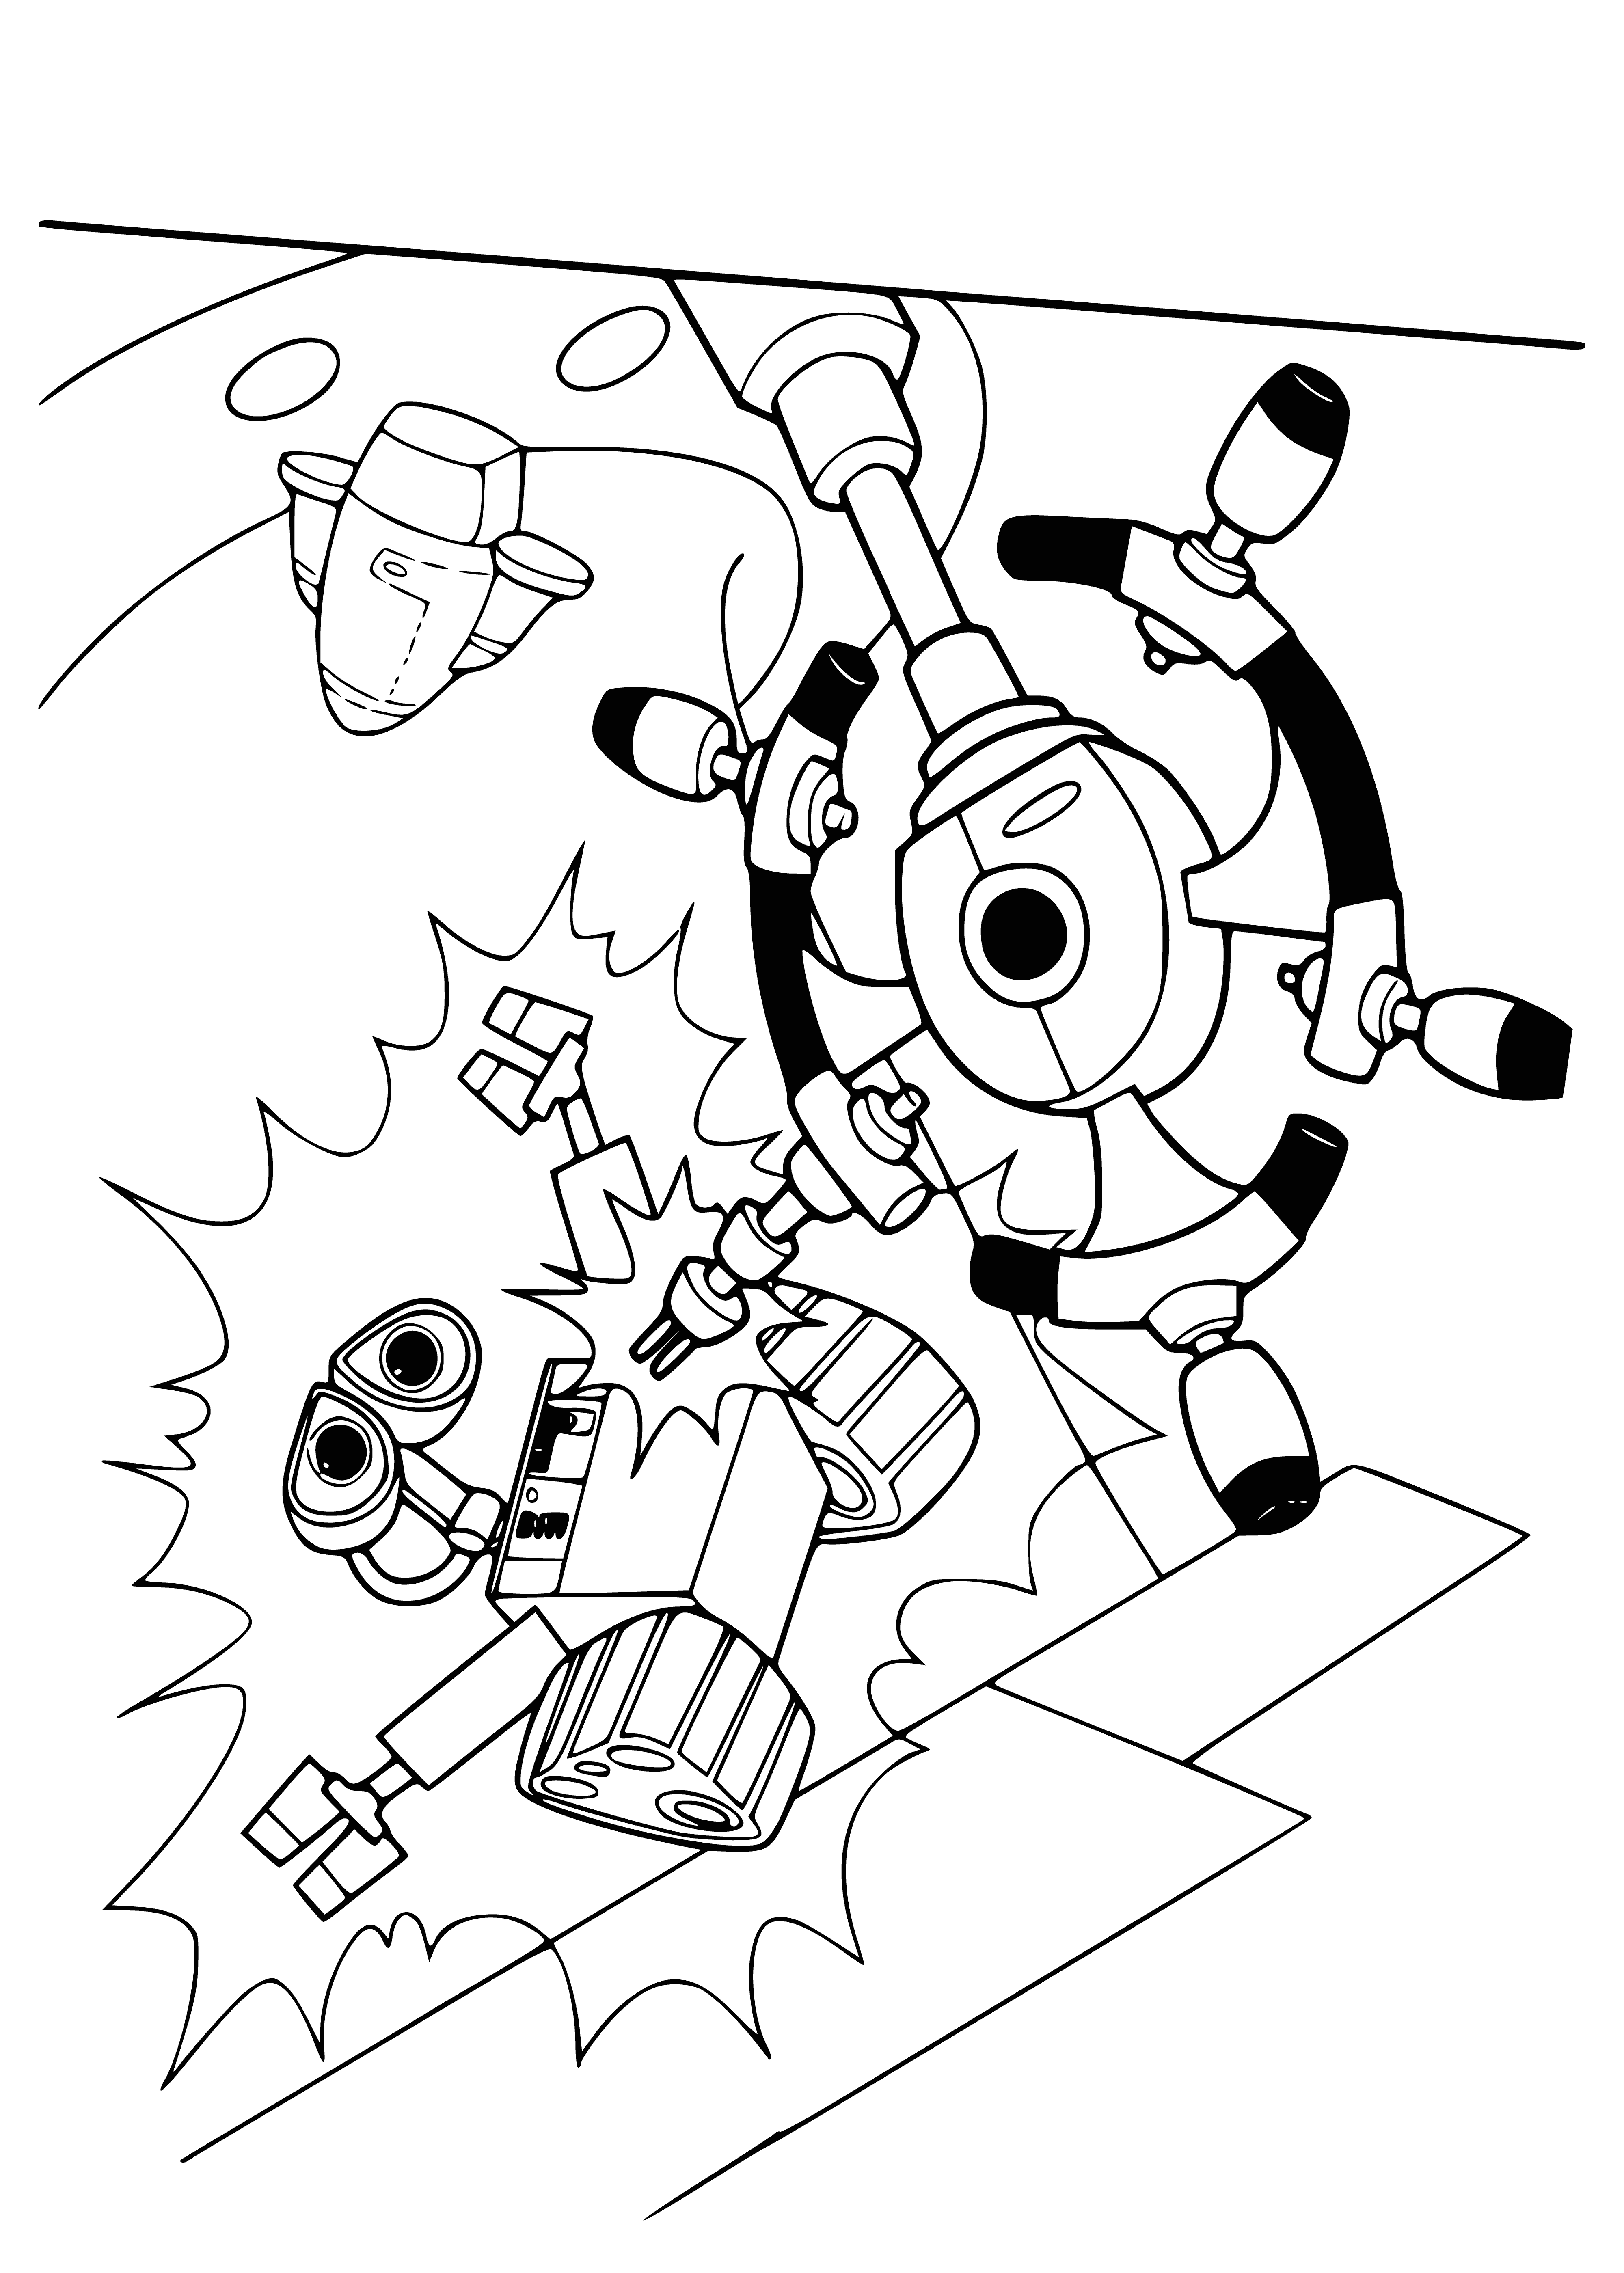 coloring page: Person holds machine handle, creating spark between the metal plates. Powered by large battery.